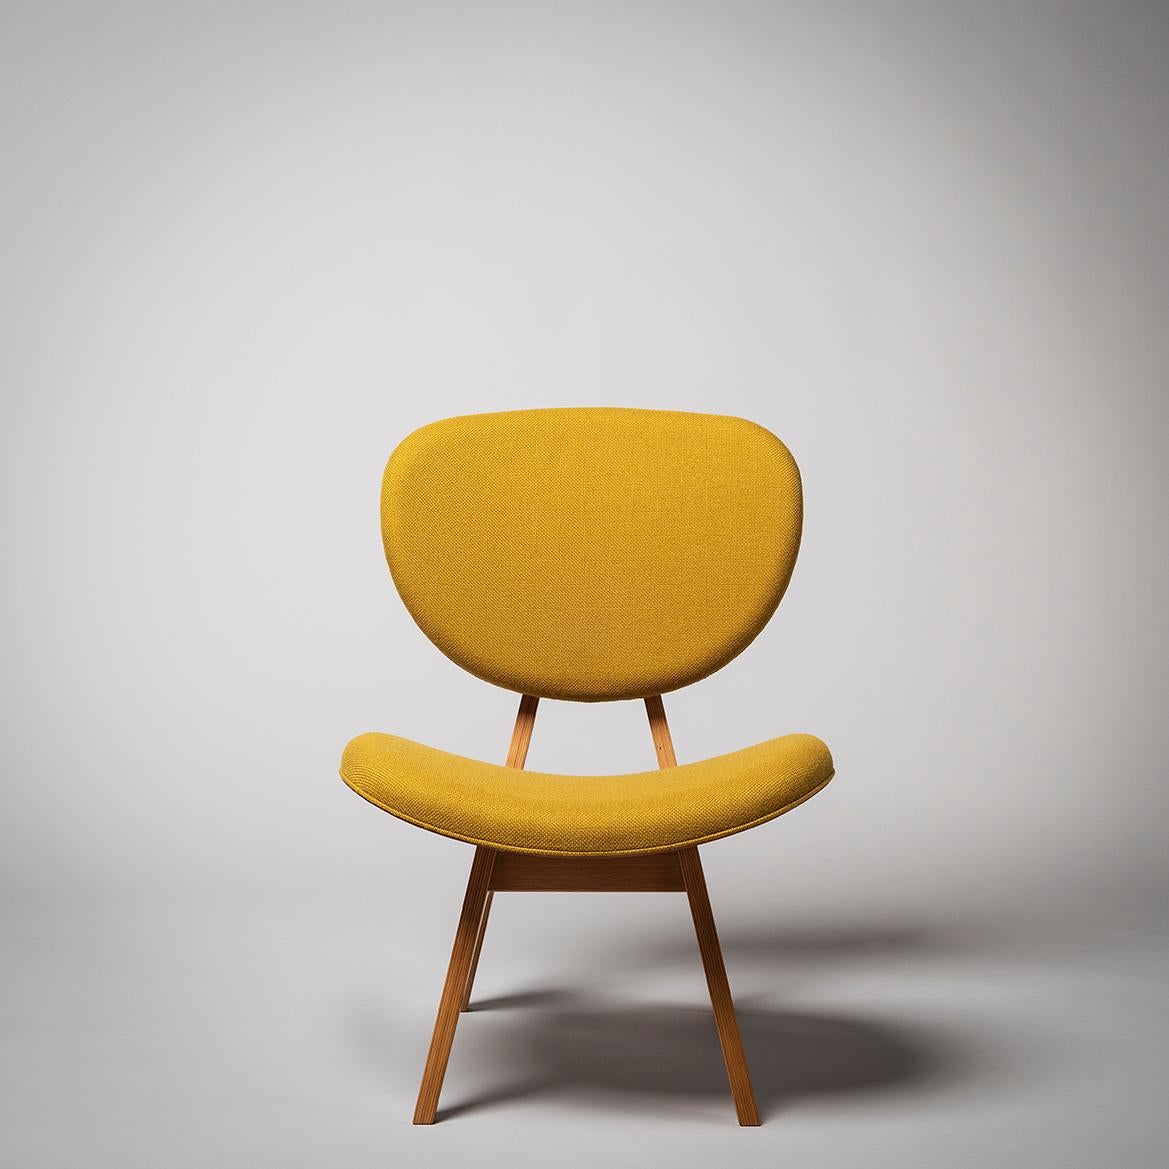 The Chuza Isu chair was designed by Daisaku Cho while enrolling at the Junzo Sakakura Architect & Associates in the 1960's.

The contrast between the straight legs and the design of the back and the seat that draws an organic curve is attractive.